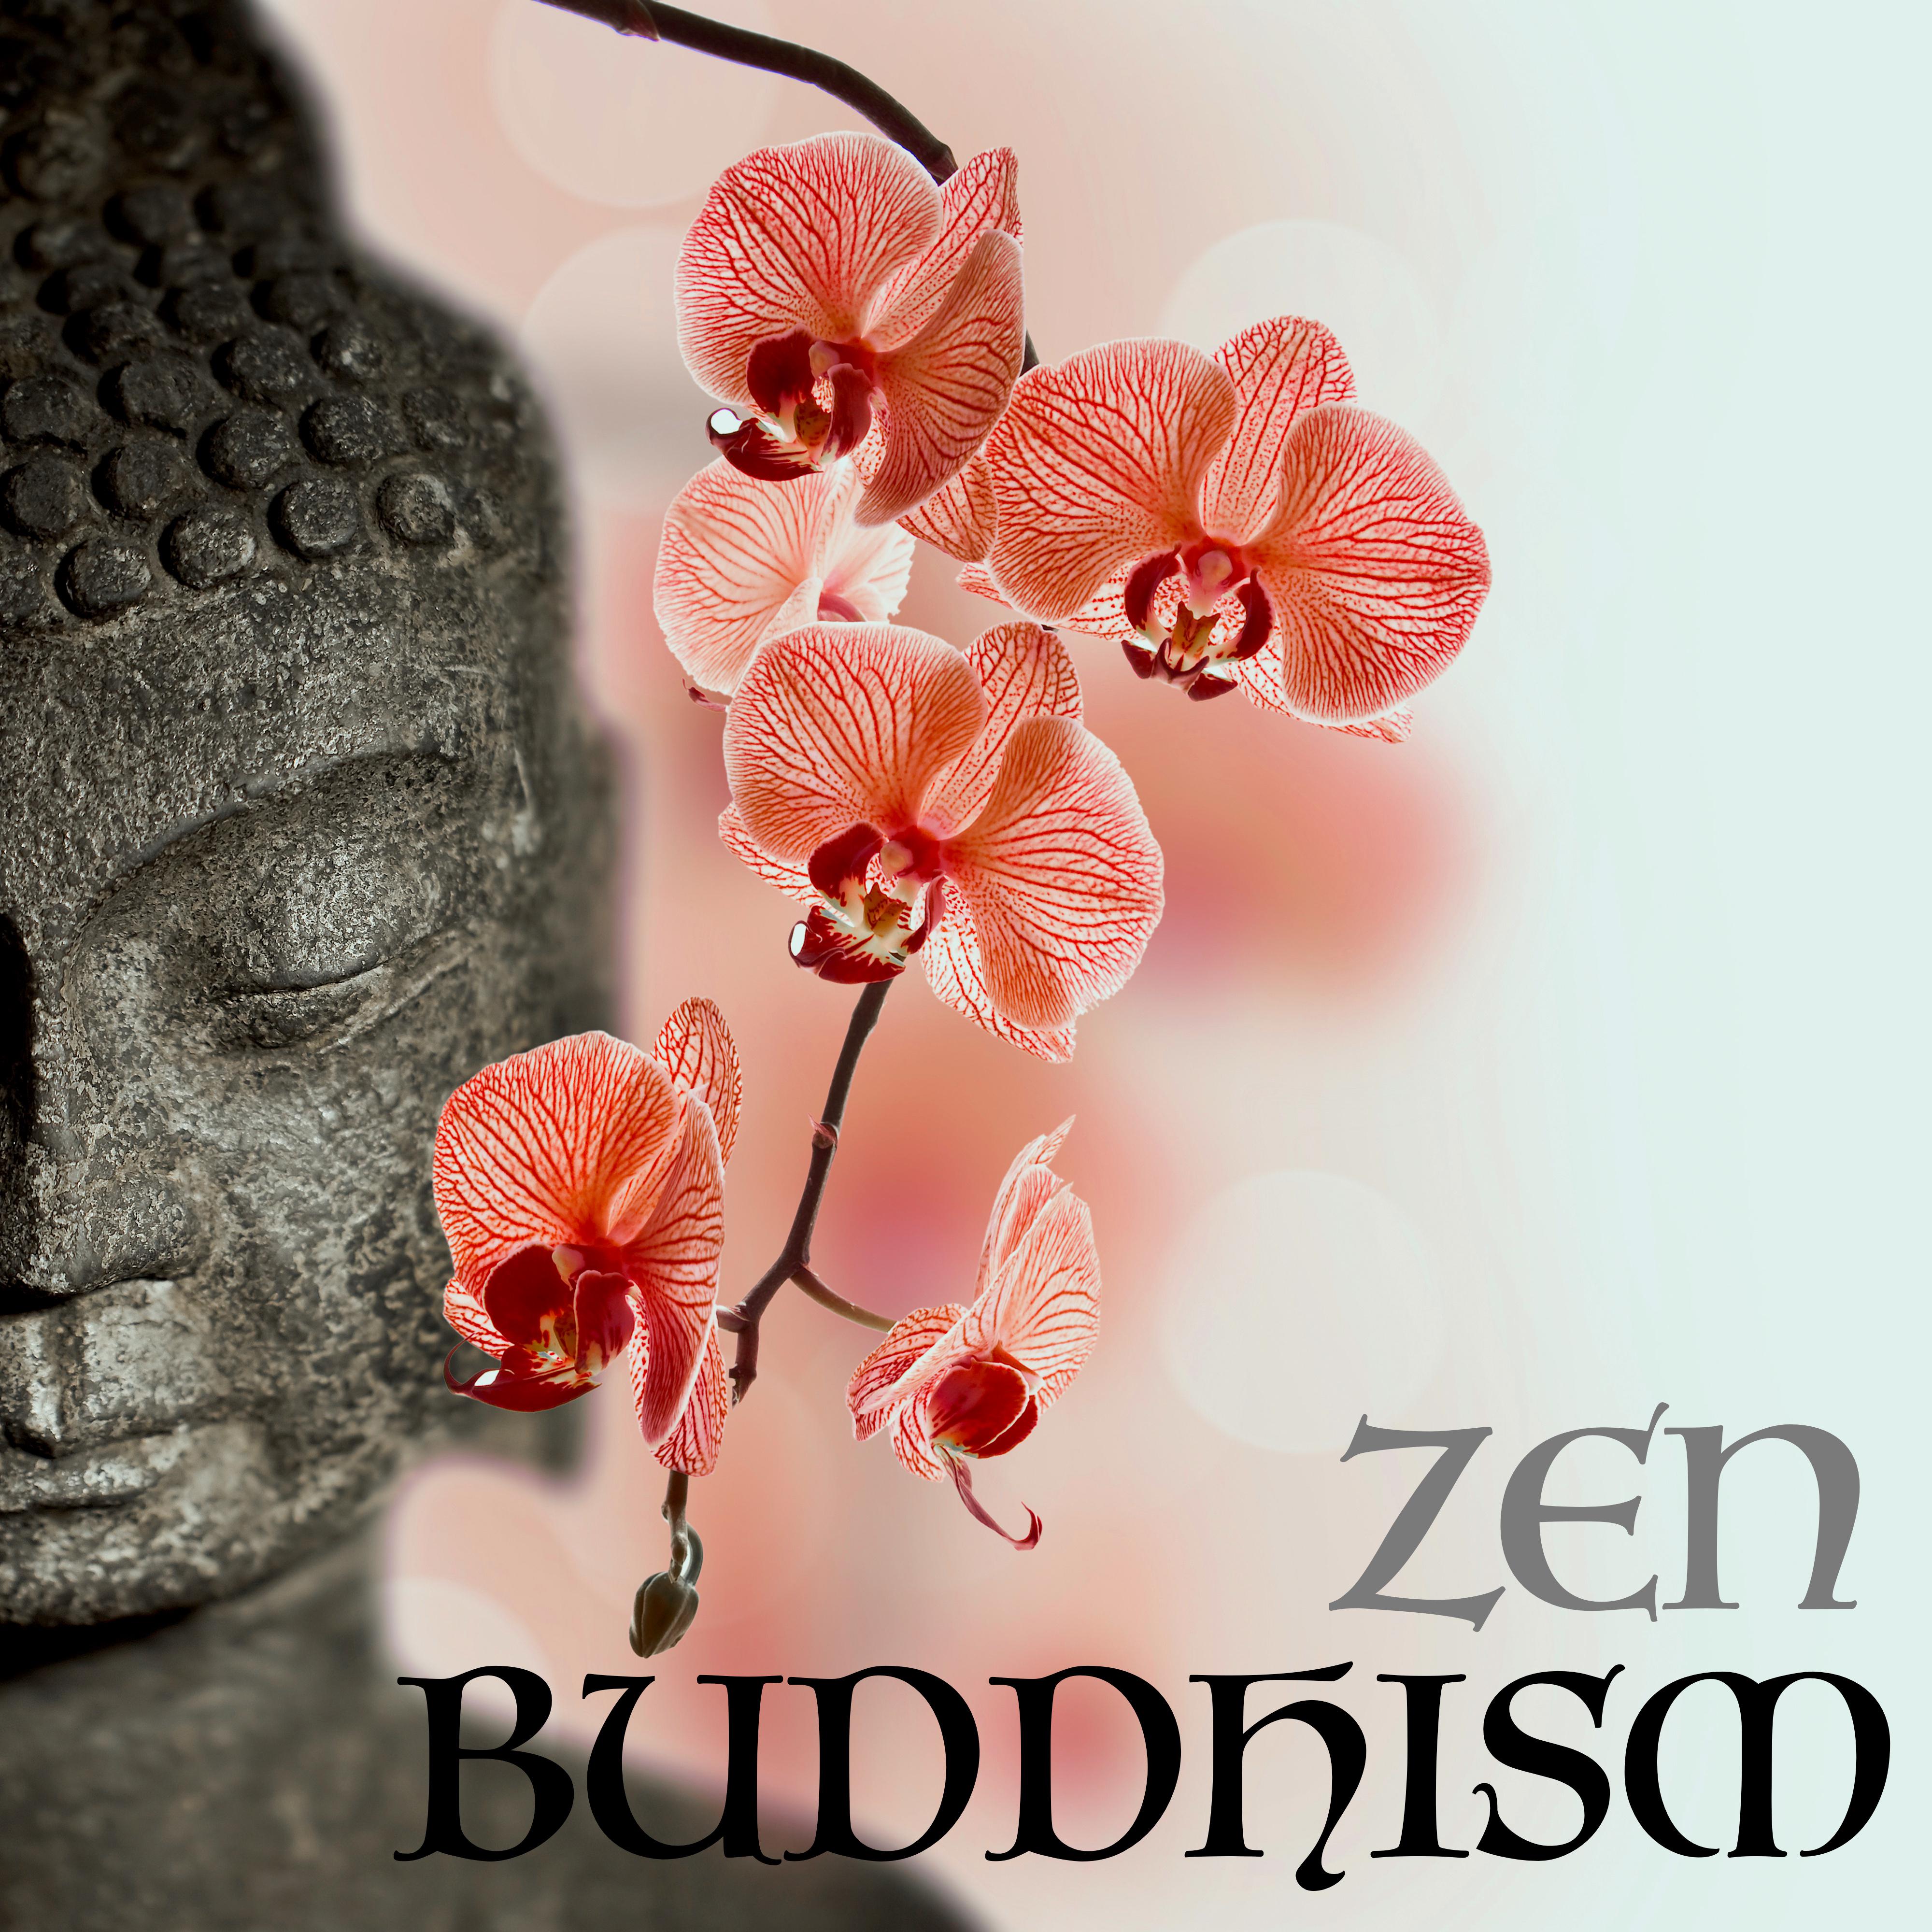 Zen Buddhism  Songs for Spiritual Retreats  Meditation, Soothing New Age Music to Relax Time  Spiritual Healing